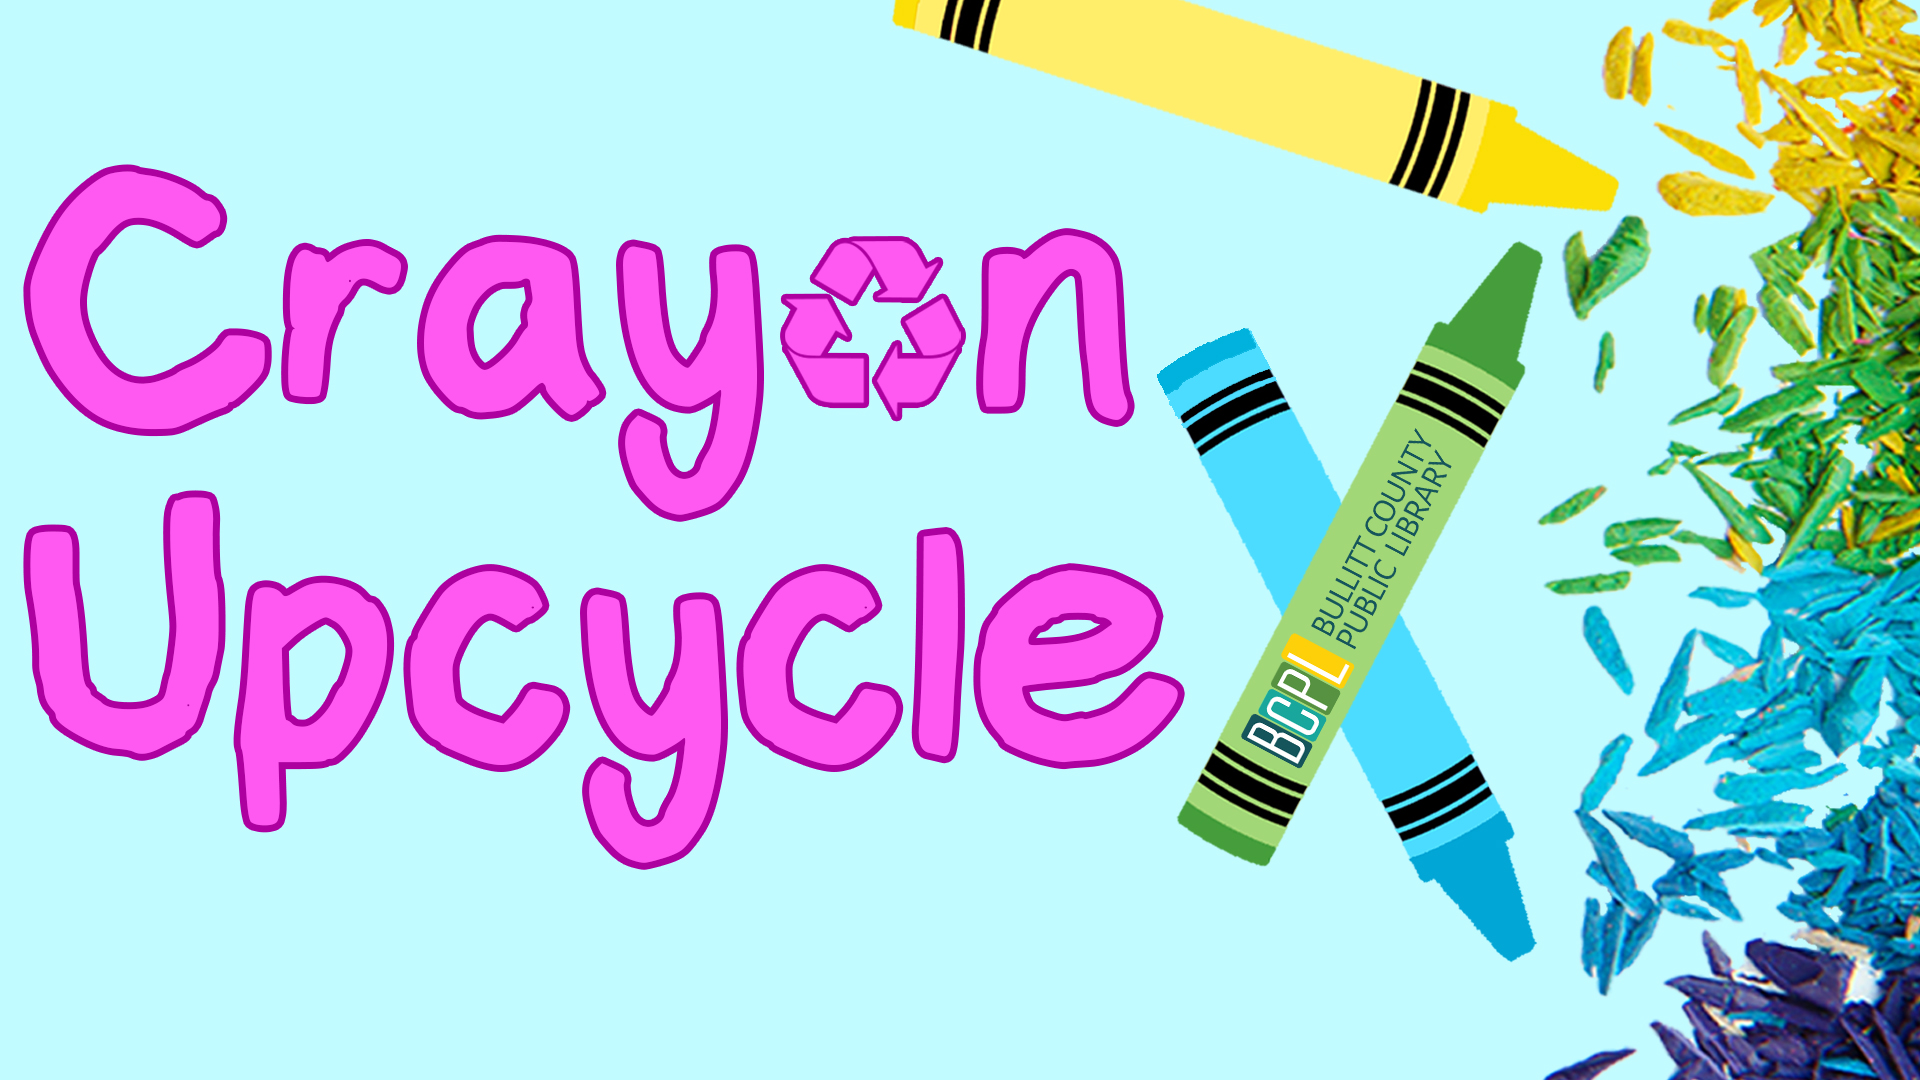 Image reads "Crayon Upcycle" against a light blue background. Three crayons are to the right of the title and crayon shavings are beside the crayons.